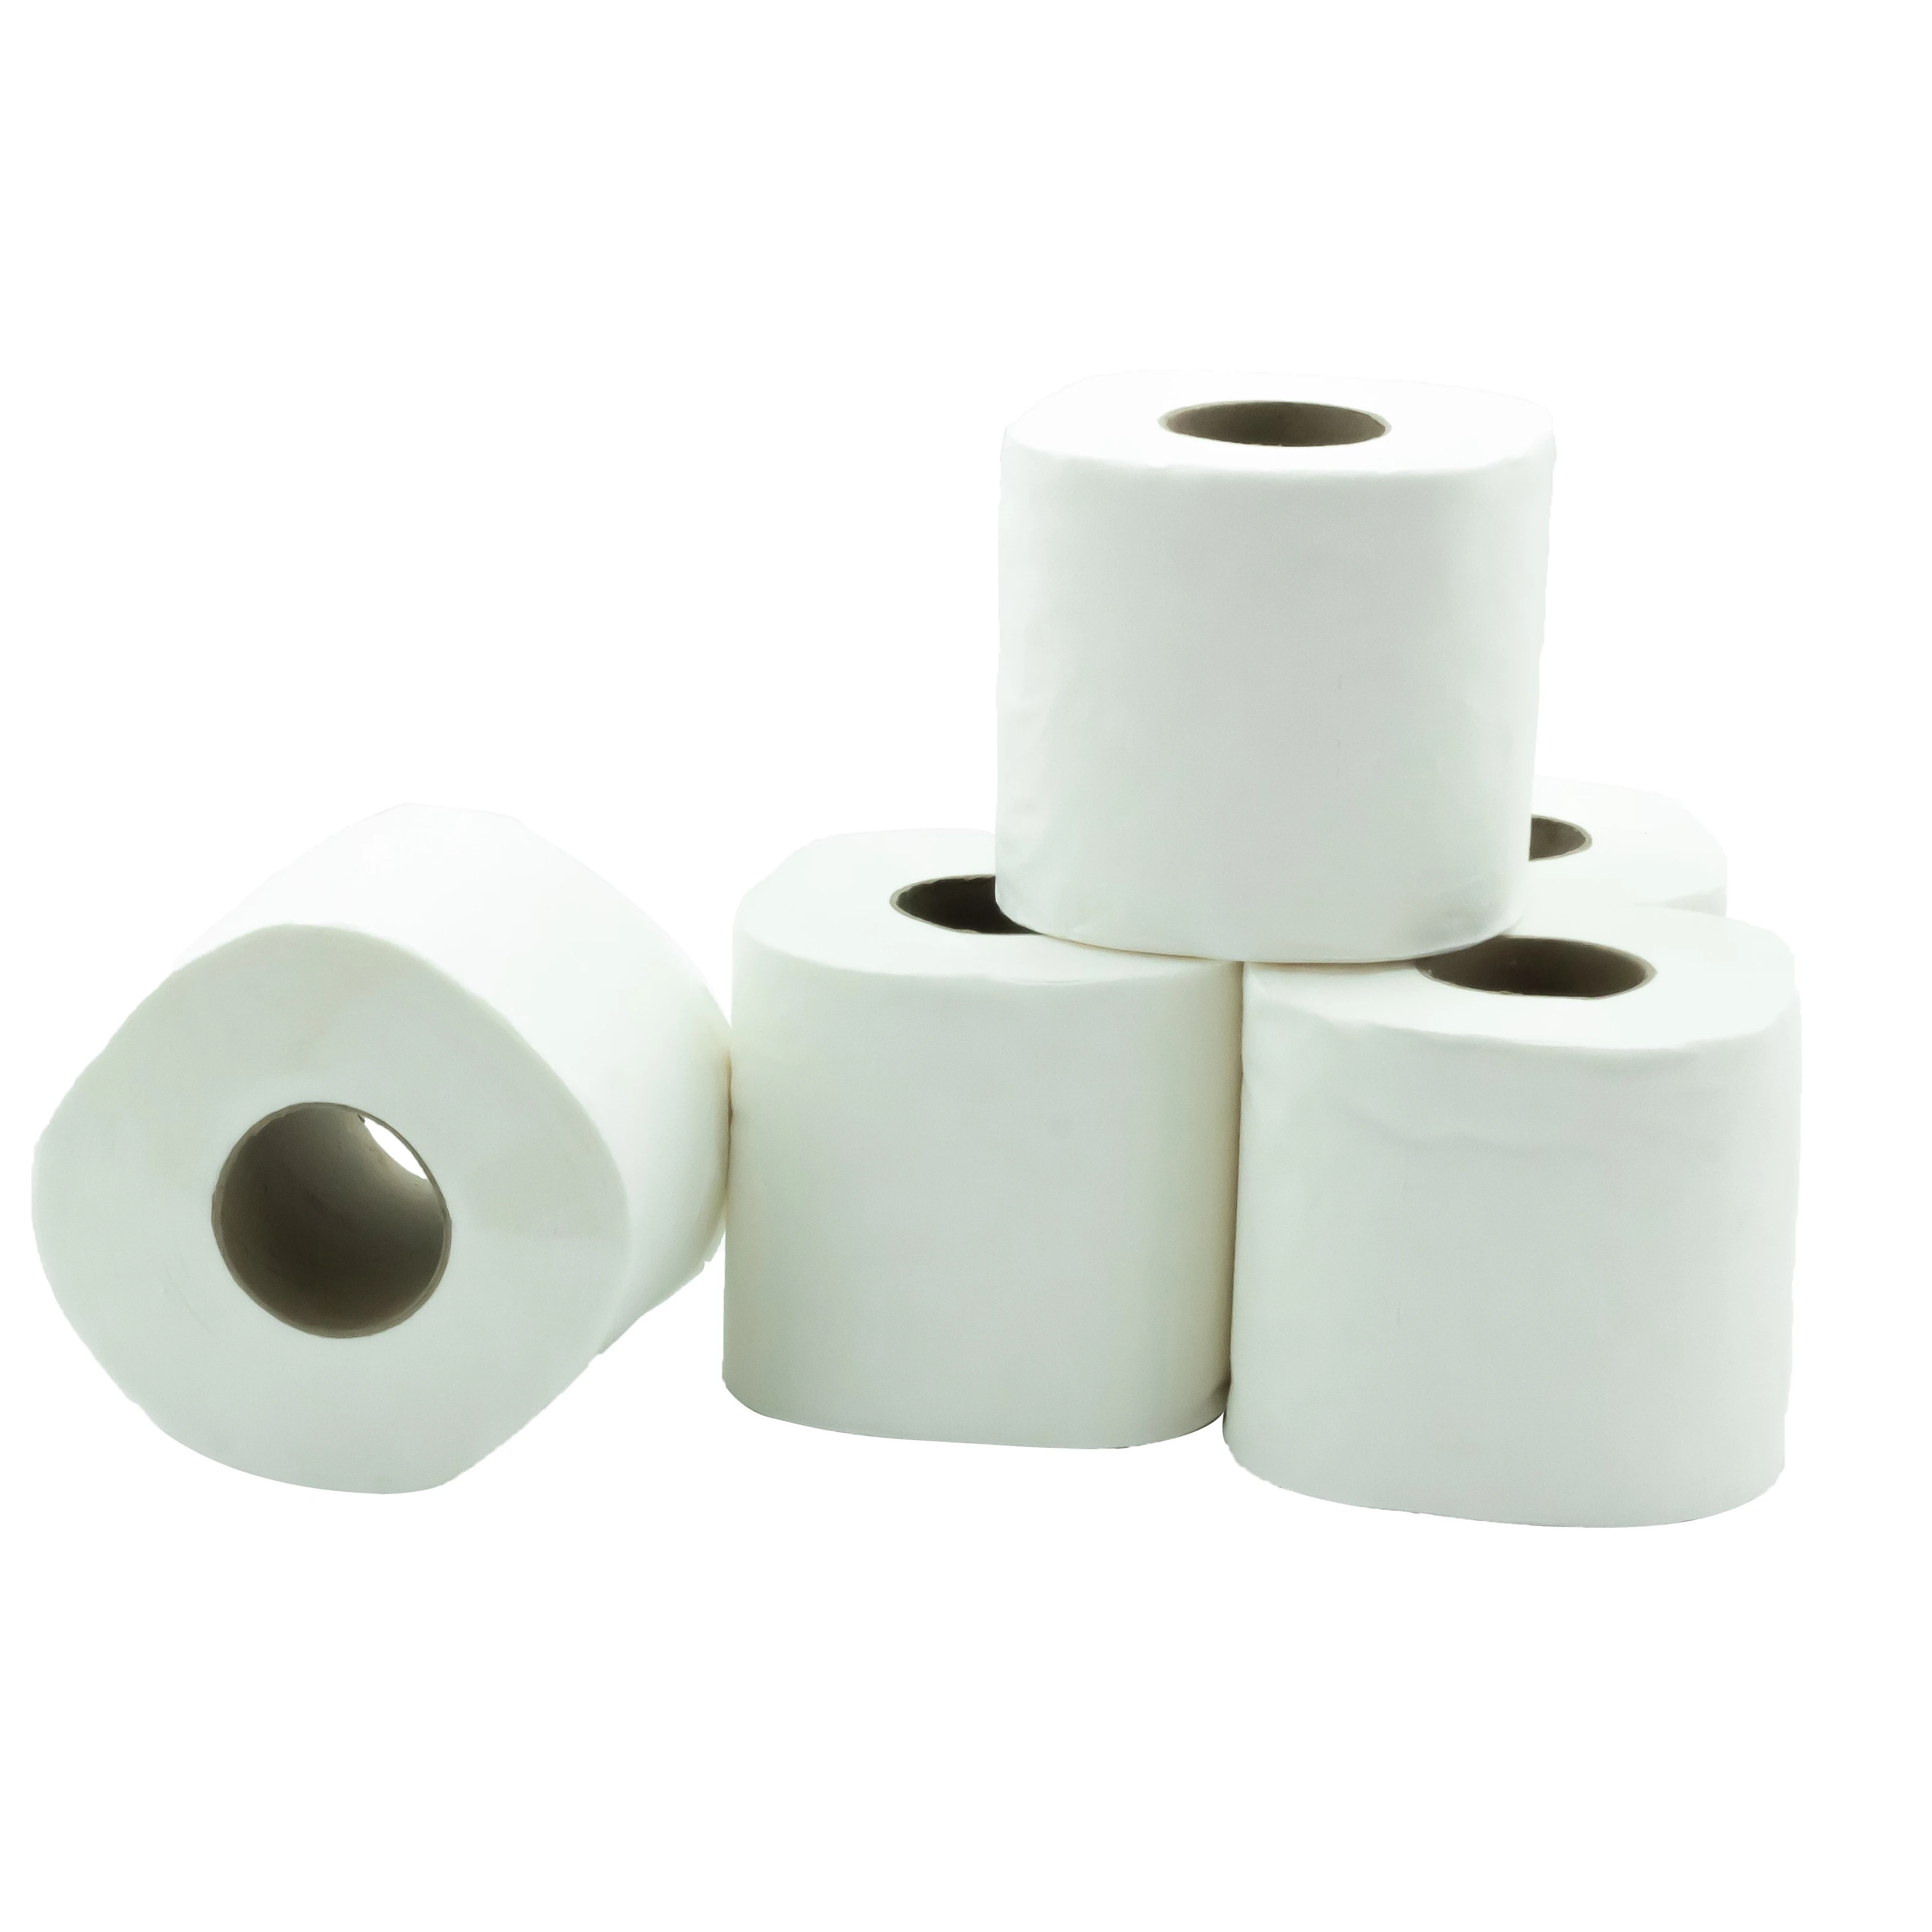 Top Quality Pulp Toilet Tissue Paper 1,2,3,4 Ply Bathroom Tissue 100% Virgin Wood Ultra Soft